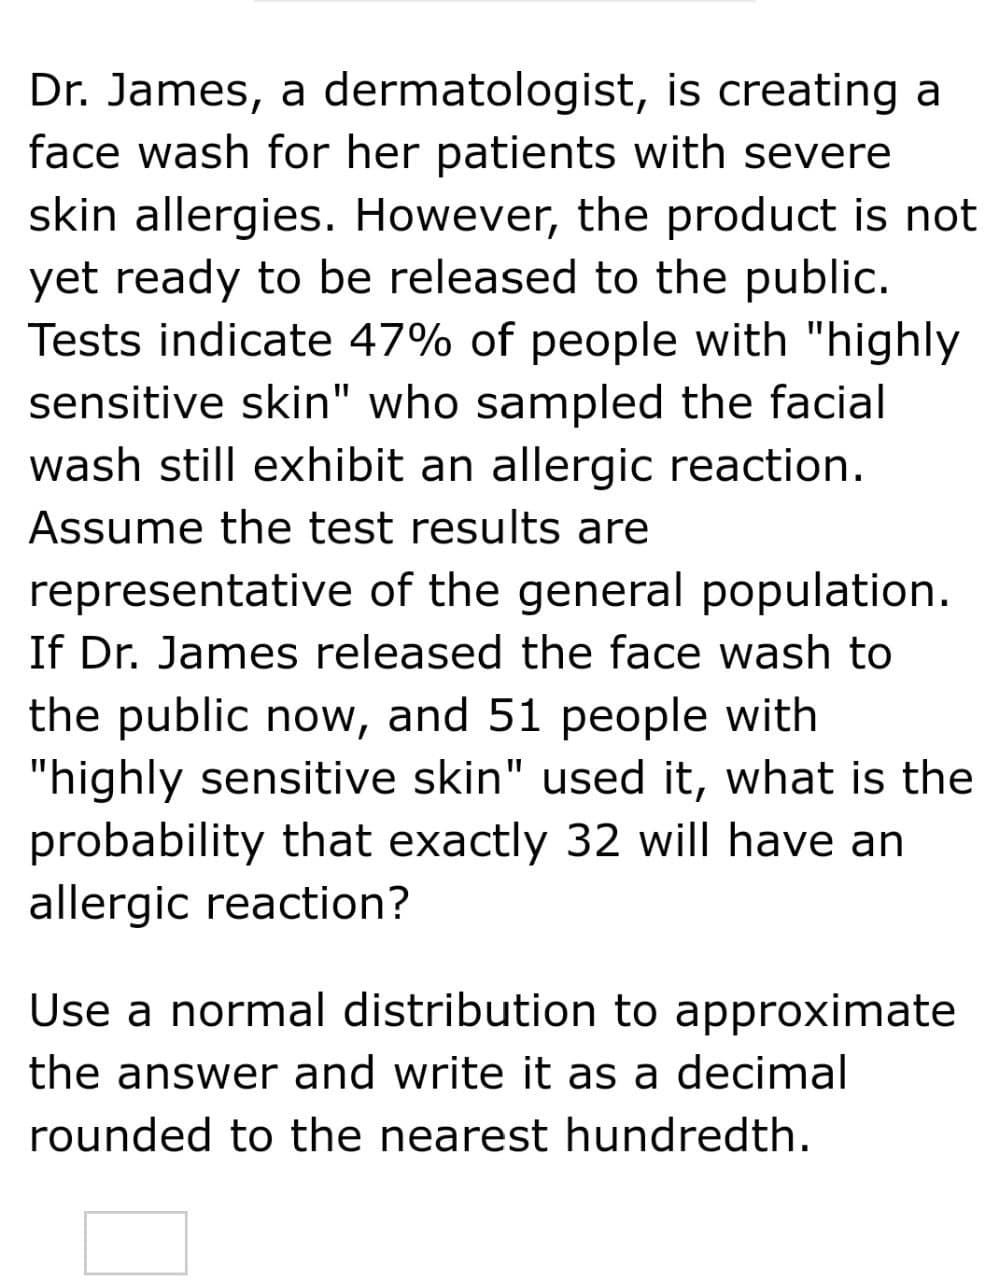 Dr. James, a dermatologist, is creating a
face wash for her patients with severe
skin allergies. However, the product is not
yet ready to be released to the public.
Tests indicate 47% of people with "highly
sensitive skin" who sampled the facial
wash still exhibit an allergic reaction.
Assume the test results are
representative of the general population.
If Dr. James released the face wash to
the public now, and 51 people with
"highly sensitive skin" used it, what is the
probability that exactly 32 will have an
allergic reaction?
Use a normal distribution to approximate
the answer and write it as a decimal
rounded to the nearest hundredth.
